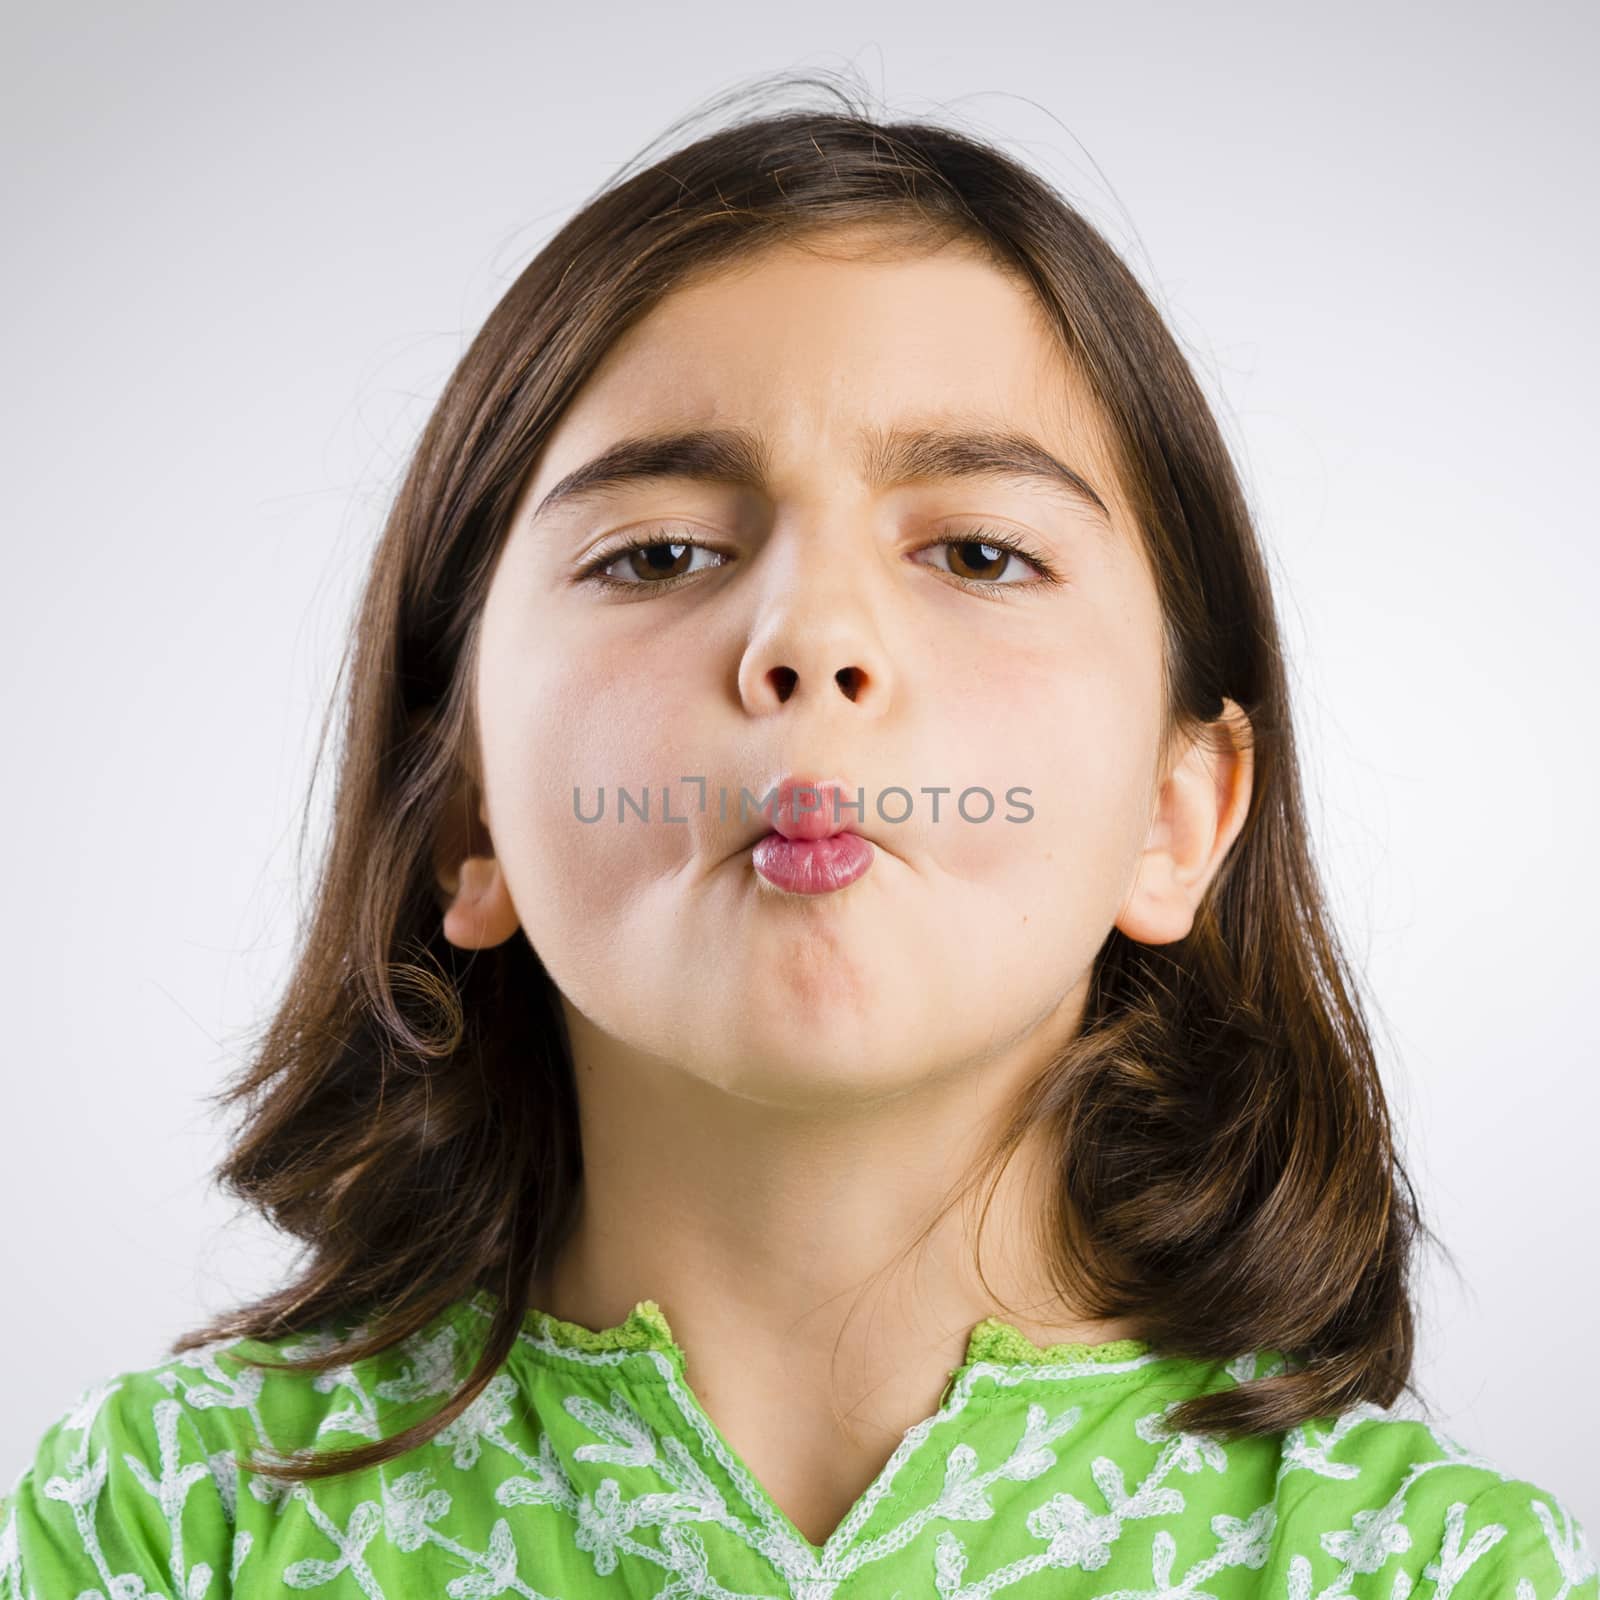 Portrait of a little girl making a fish mouth expression